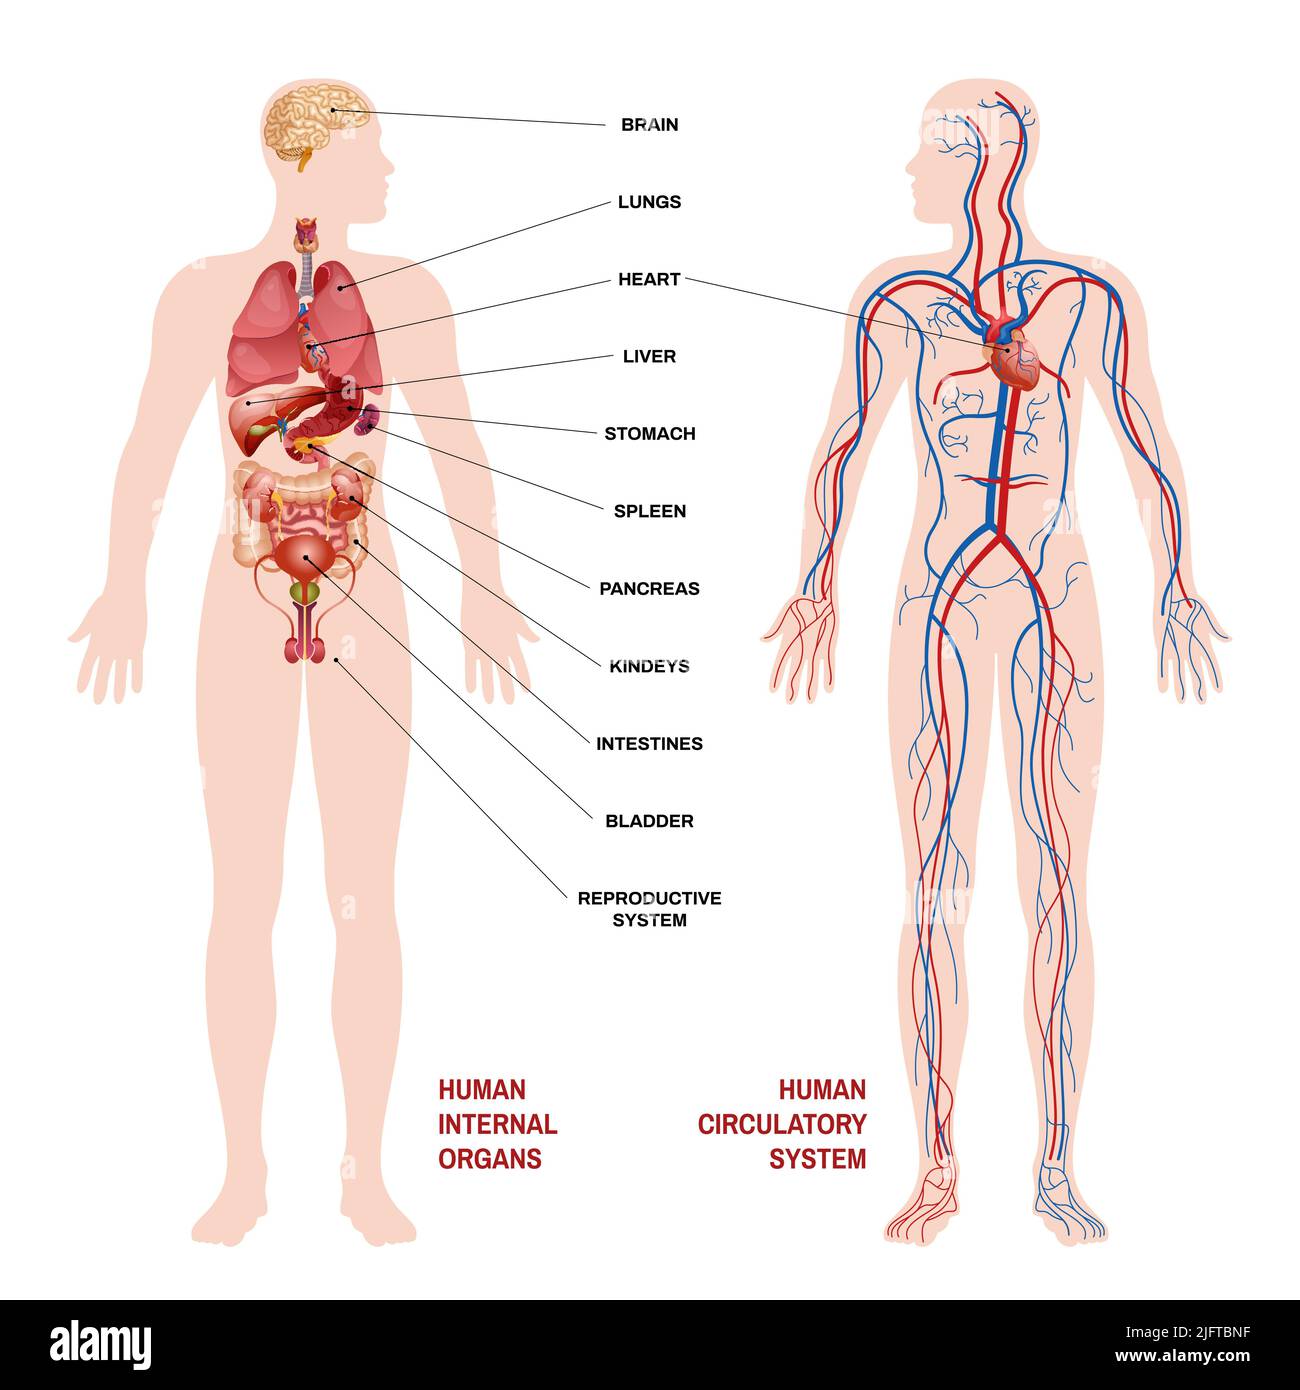 Internal human organs circulatory system scheme concept pointers for clarity with description of where the organ is located vector illustration Stock Vector